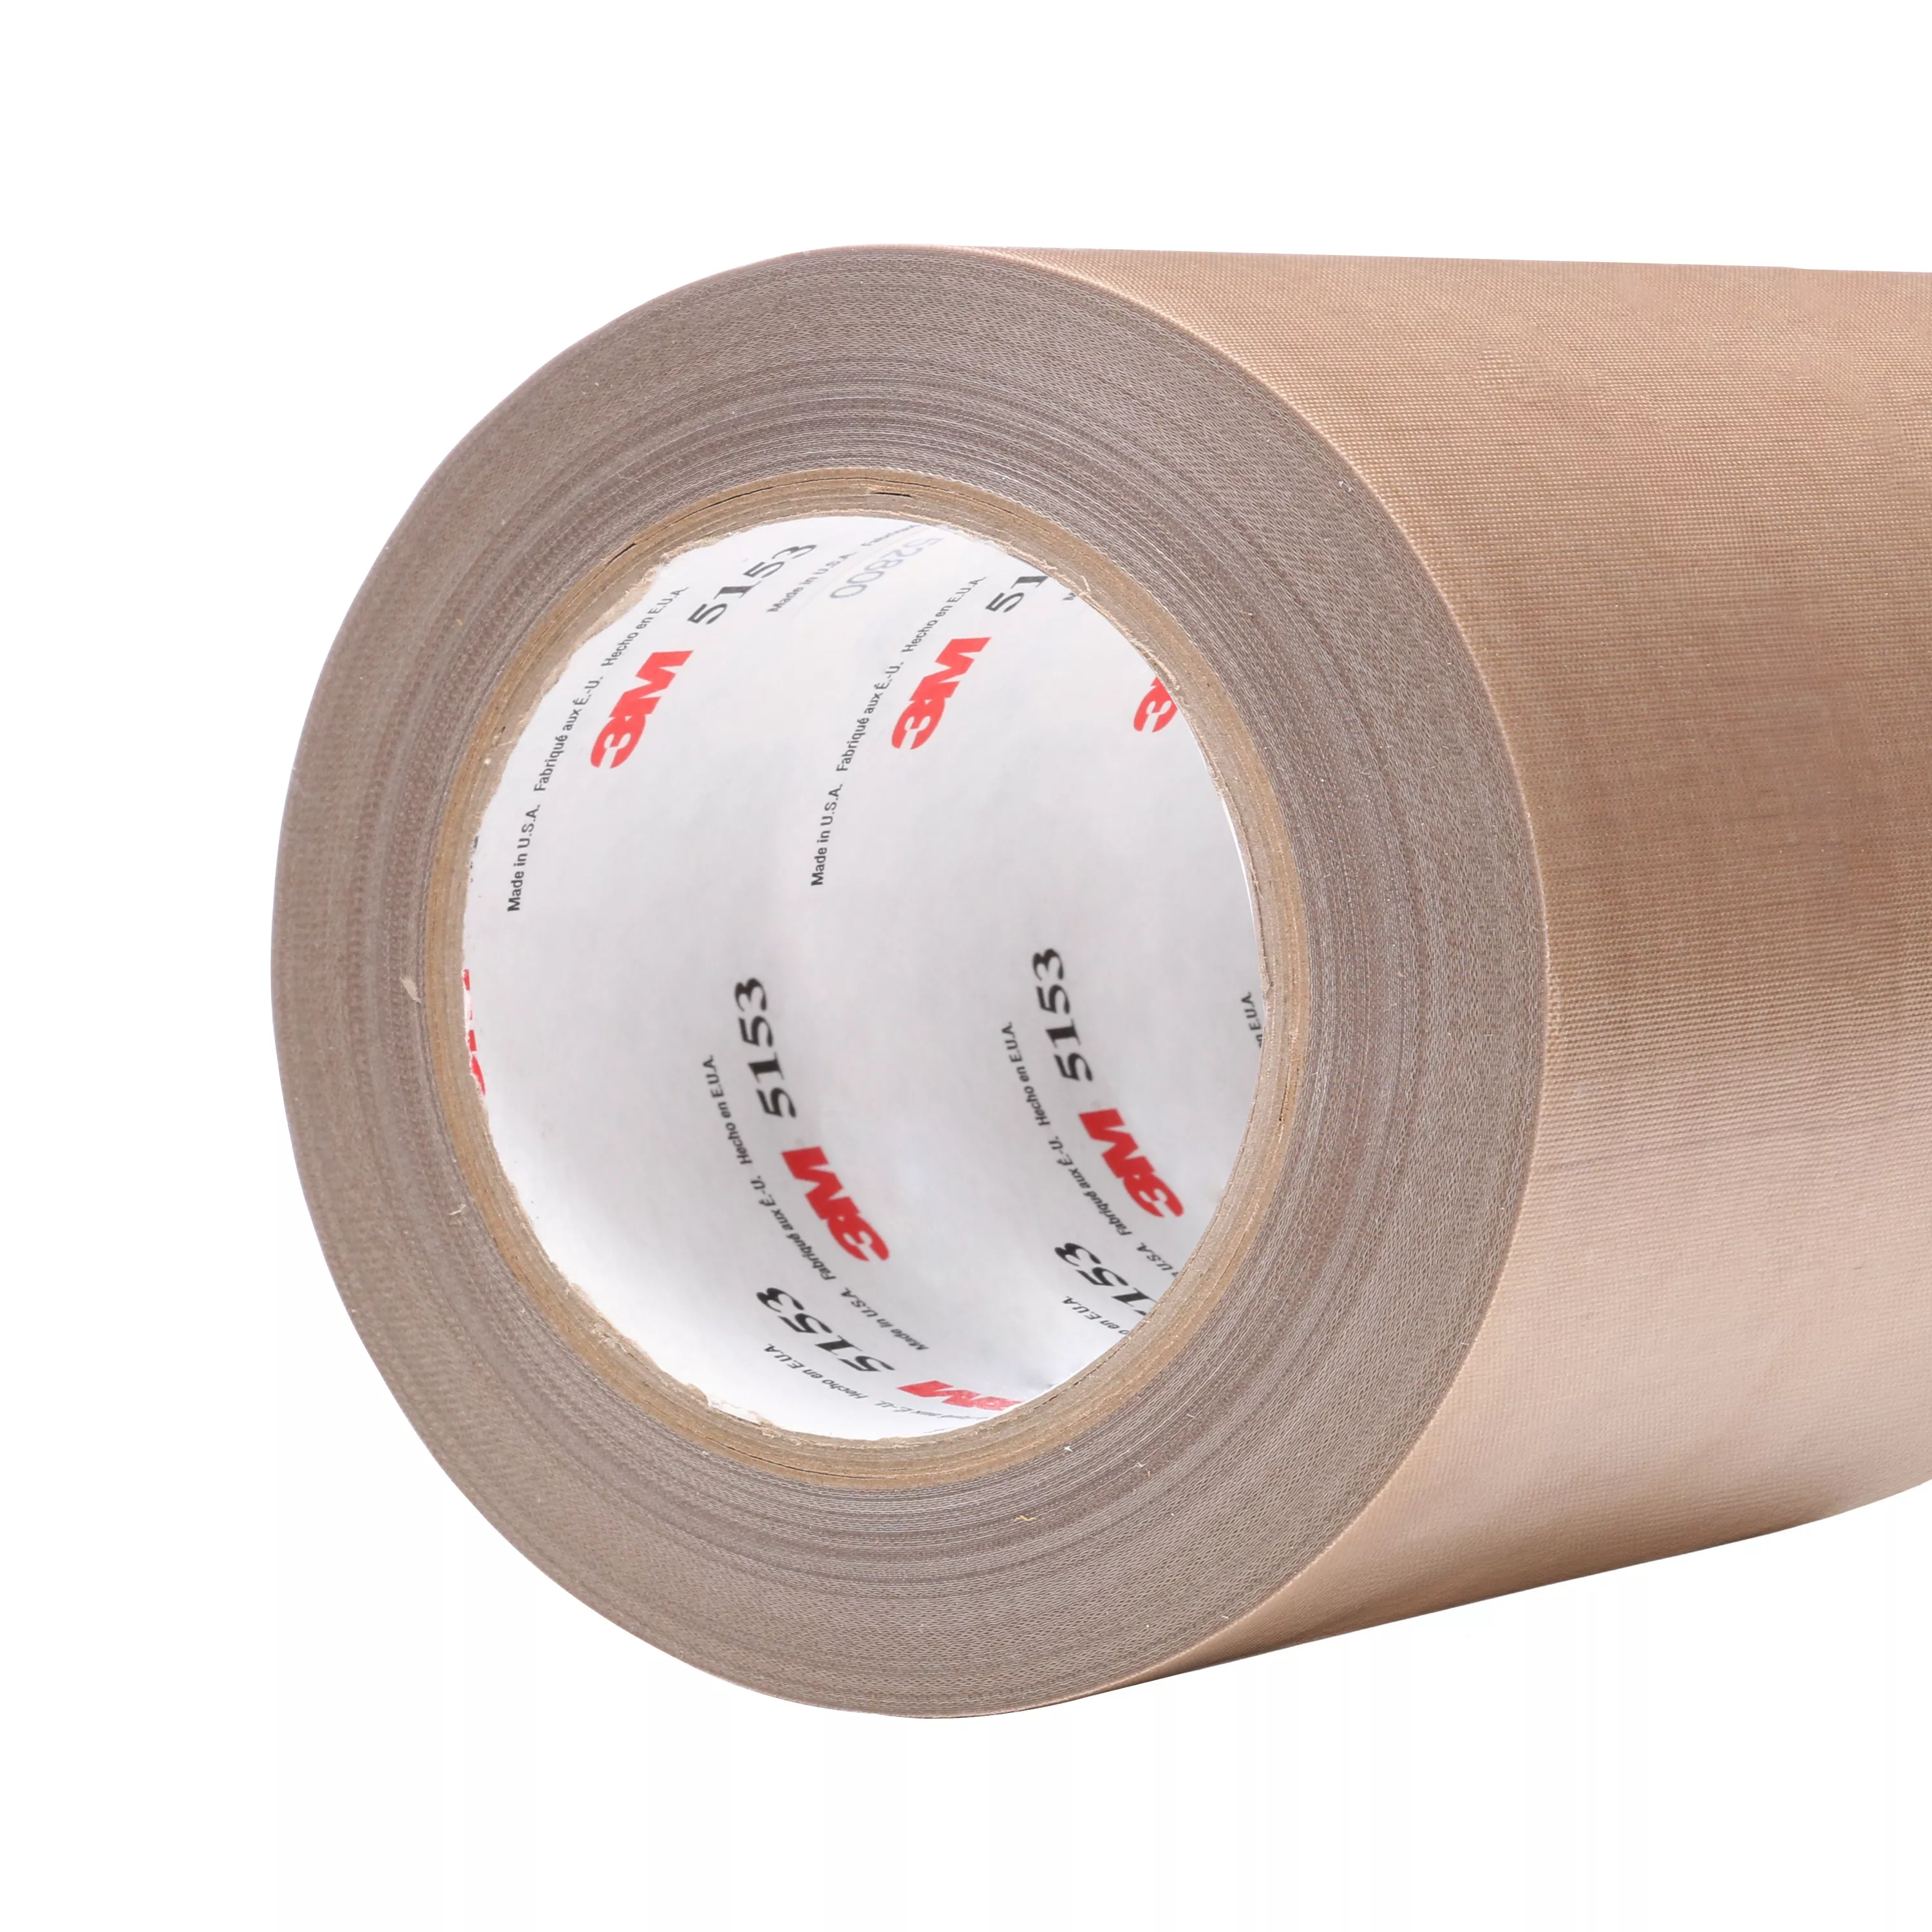 3M™ General Purpose PTFE Glass Cloth Tape 5153, Light Brown, 19 1/2 in x
72 yd, 8 mil, 1 Roll/Case